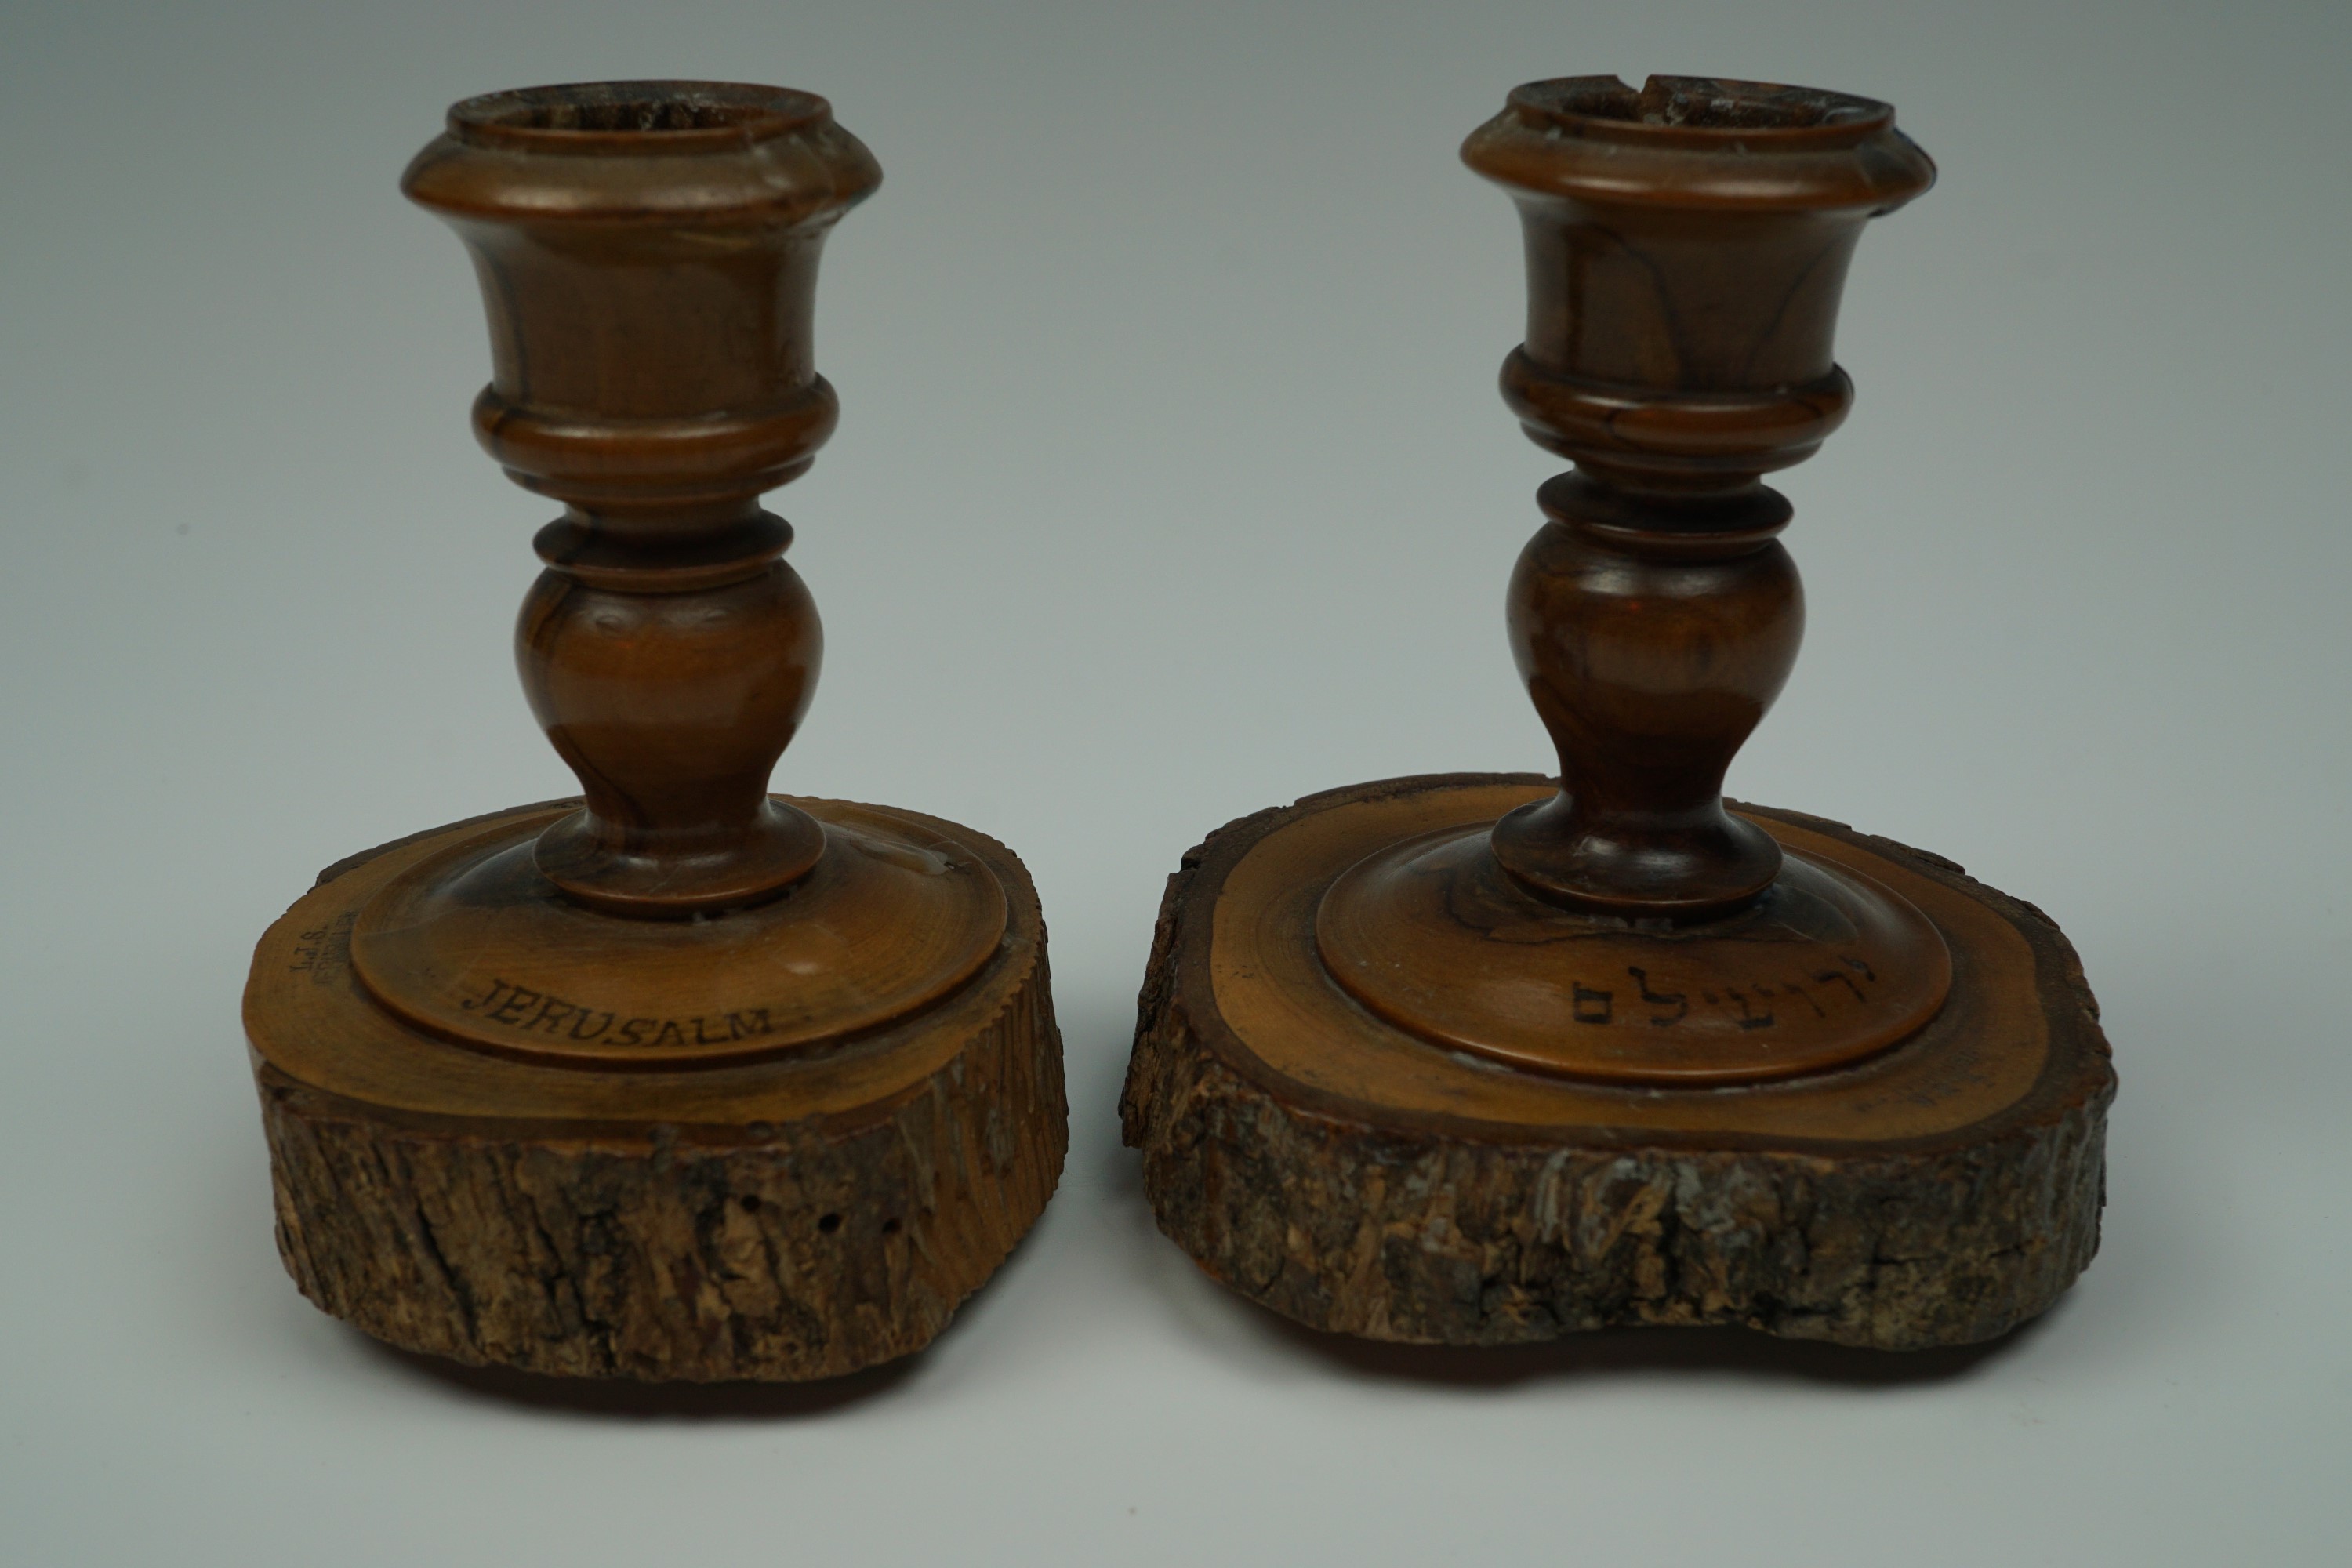 A pair of early 20th Century Jerusalem turned olive wood candlesticks, 7.5 cm